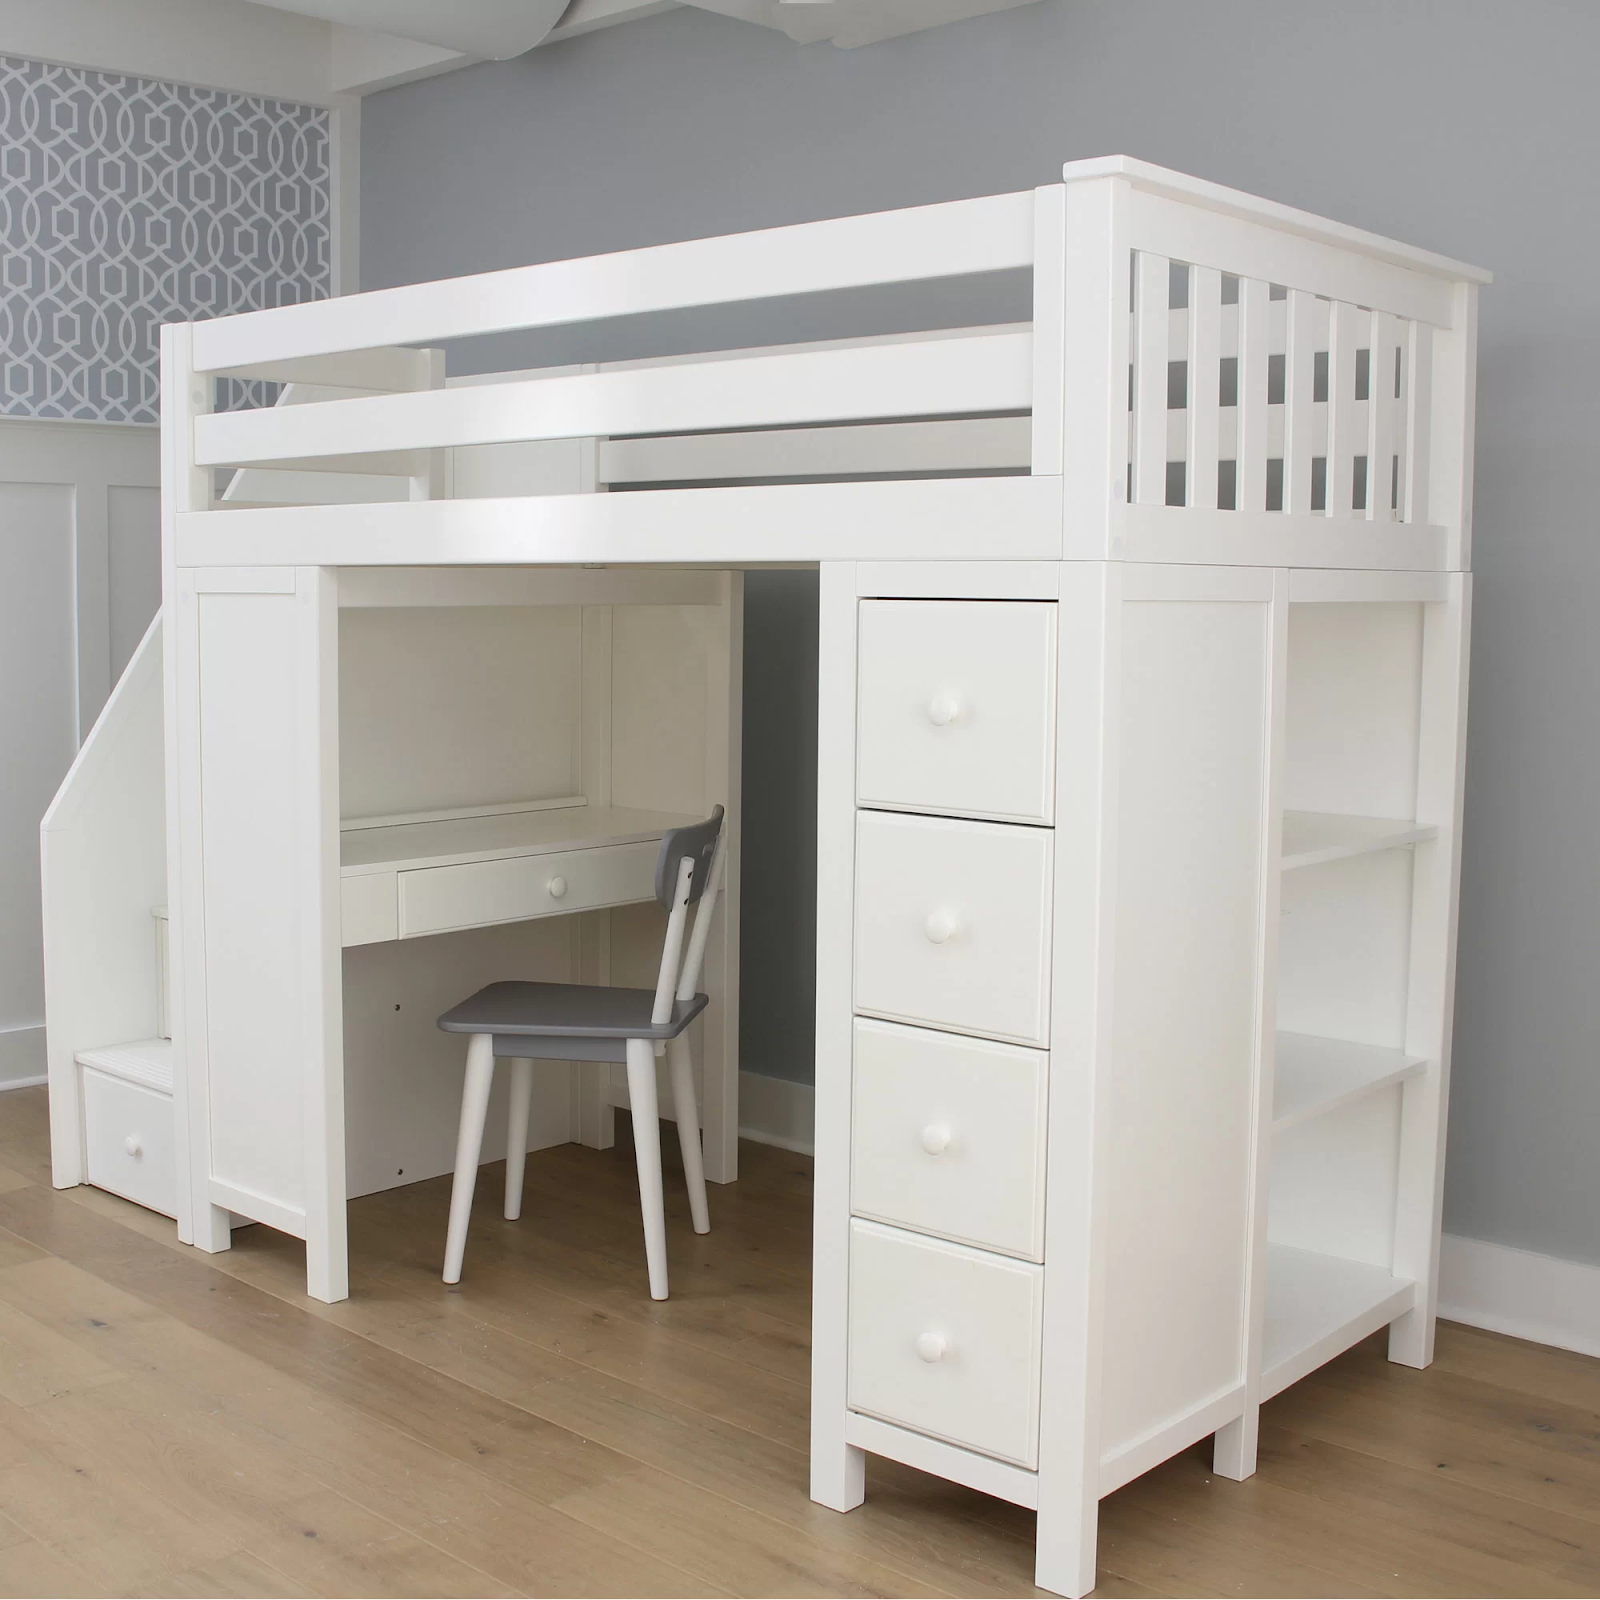 Space Below Your Loft Bed, Loft Bed With Underneath Storage